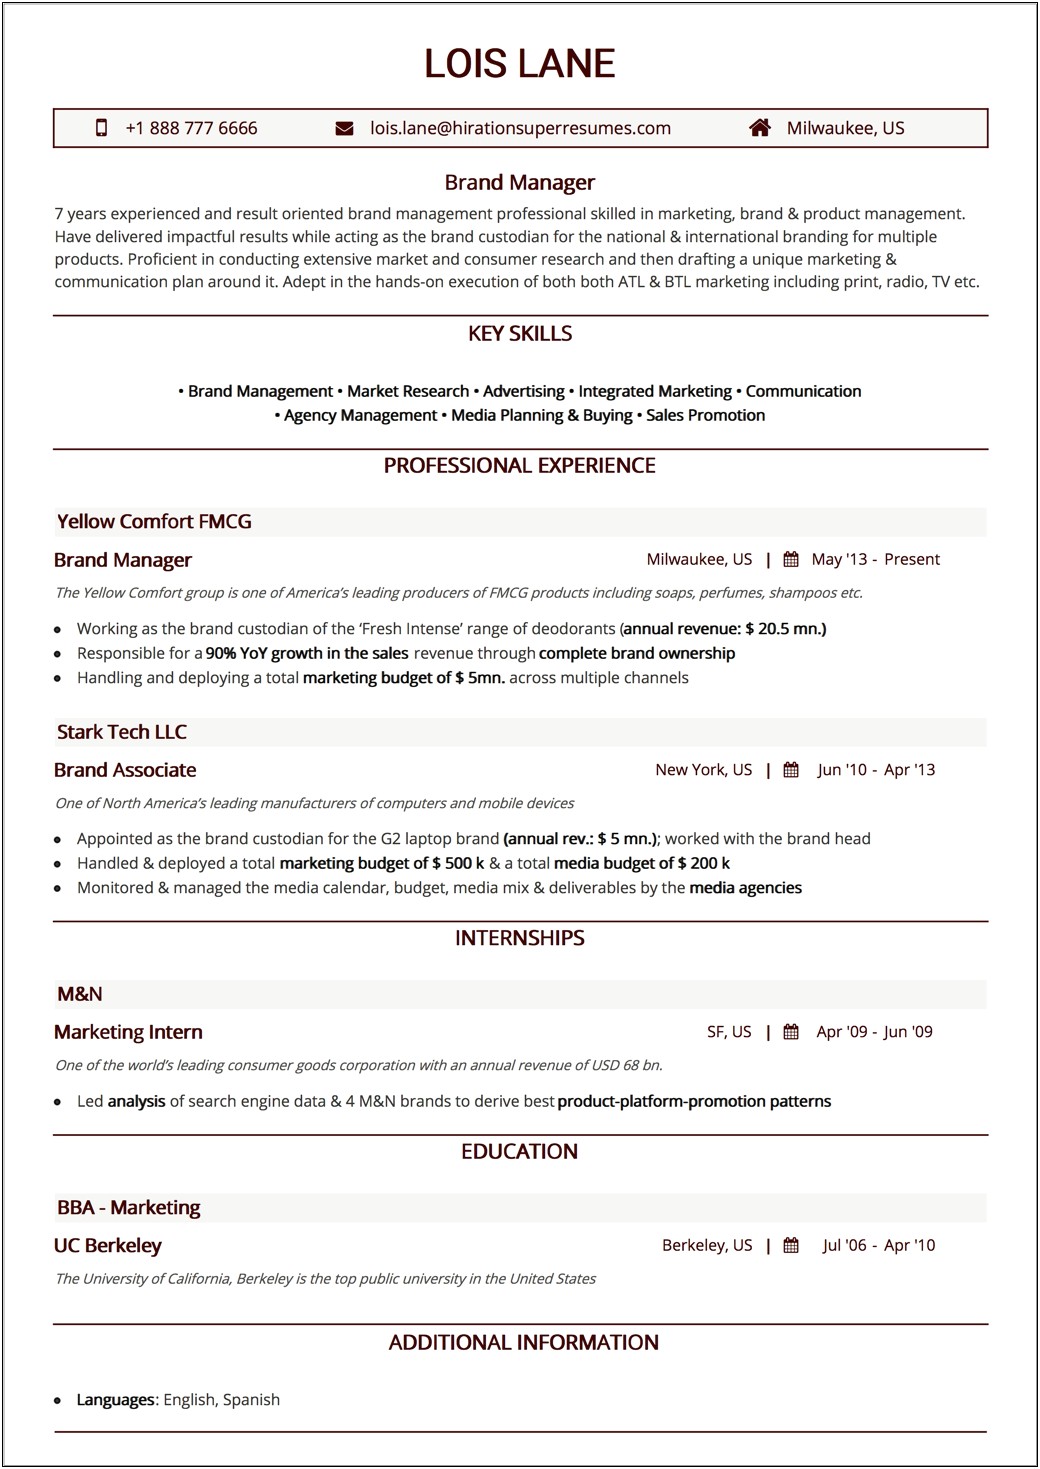 Atm Card Systems Business Analyst Sample Resume